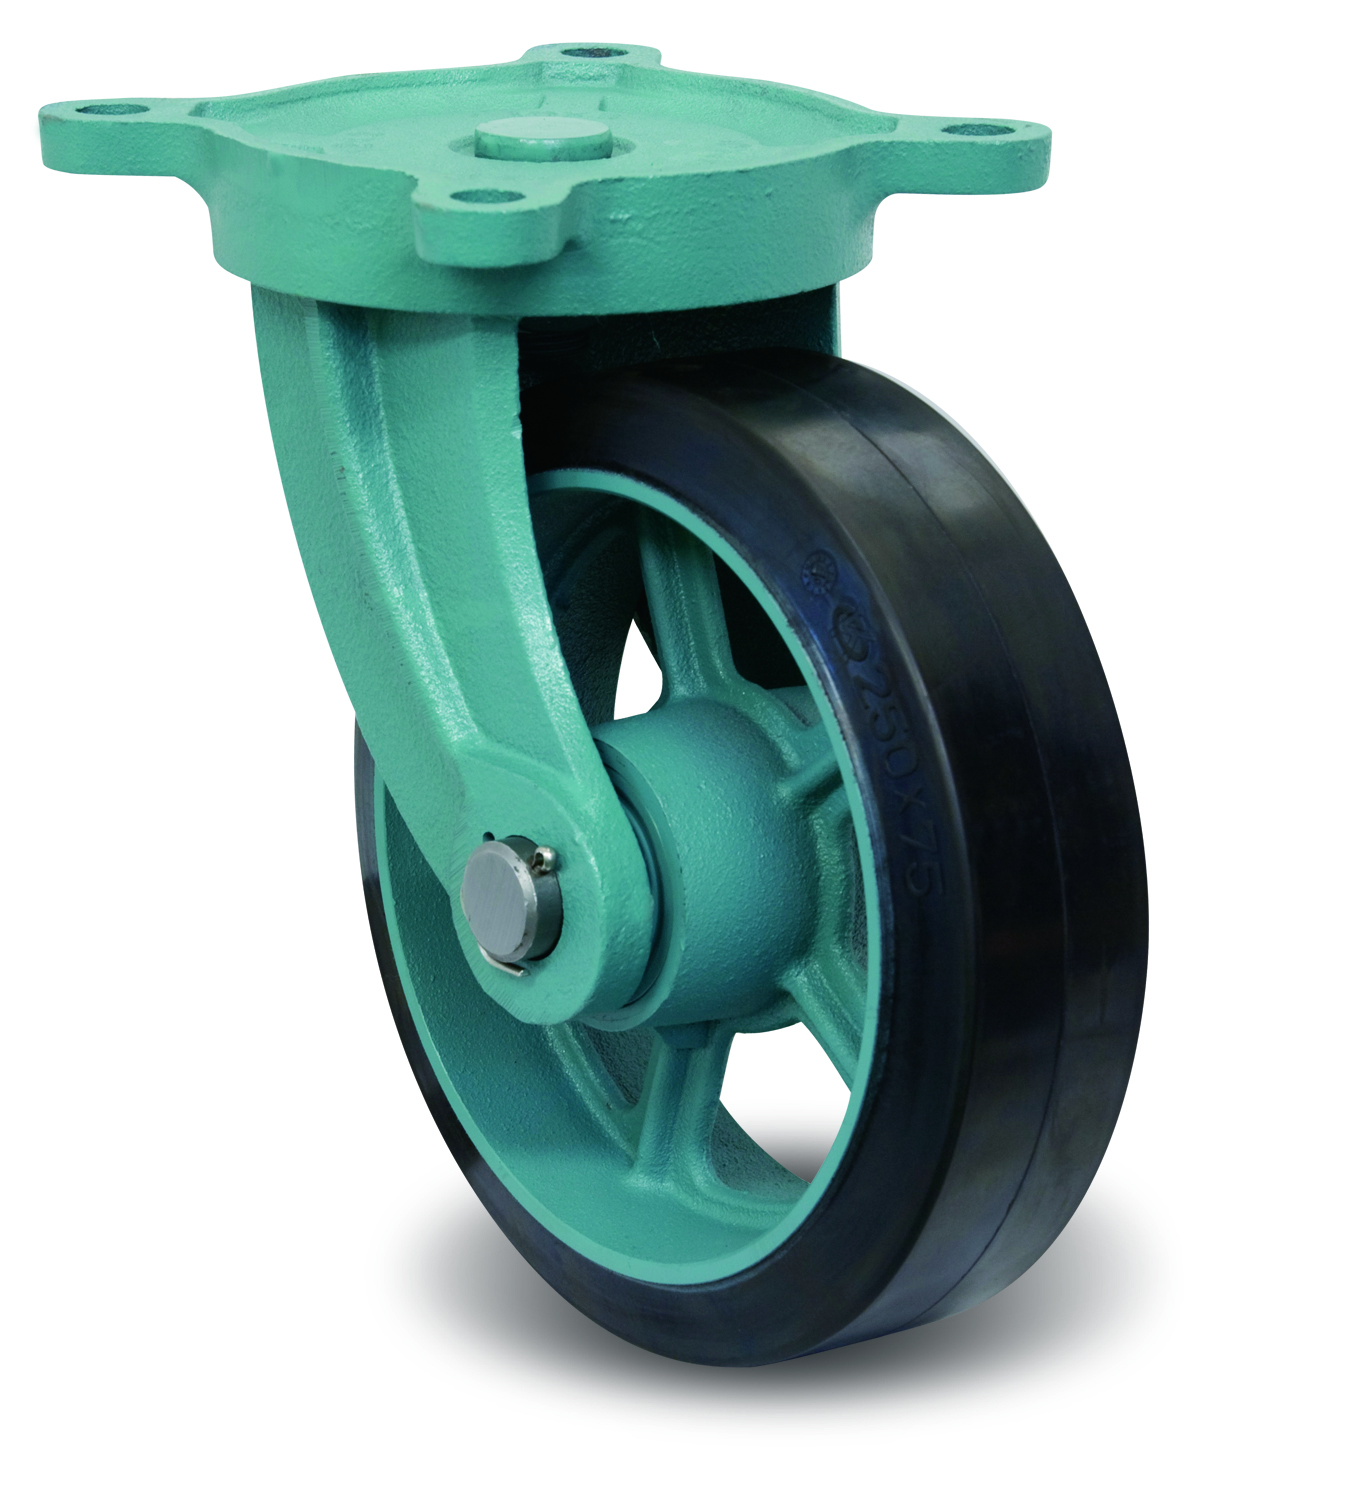 Casters - Rubber with Ductile Steel Swivel Plate, MG-O Series with Bracket, E/MG-O Series. EMG-O150X50